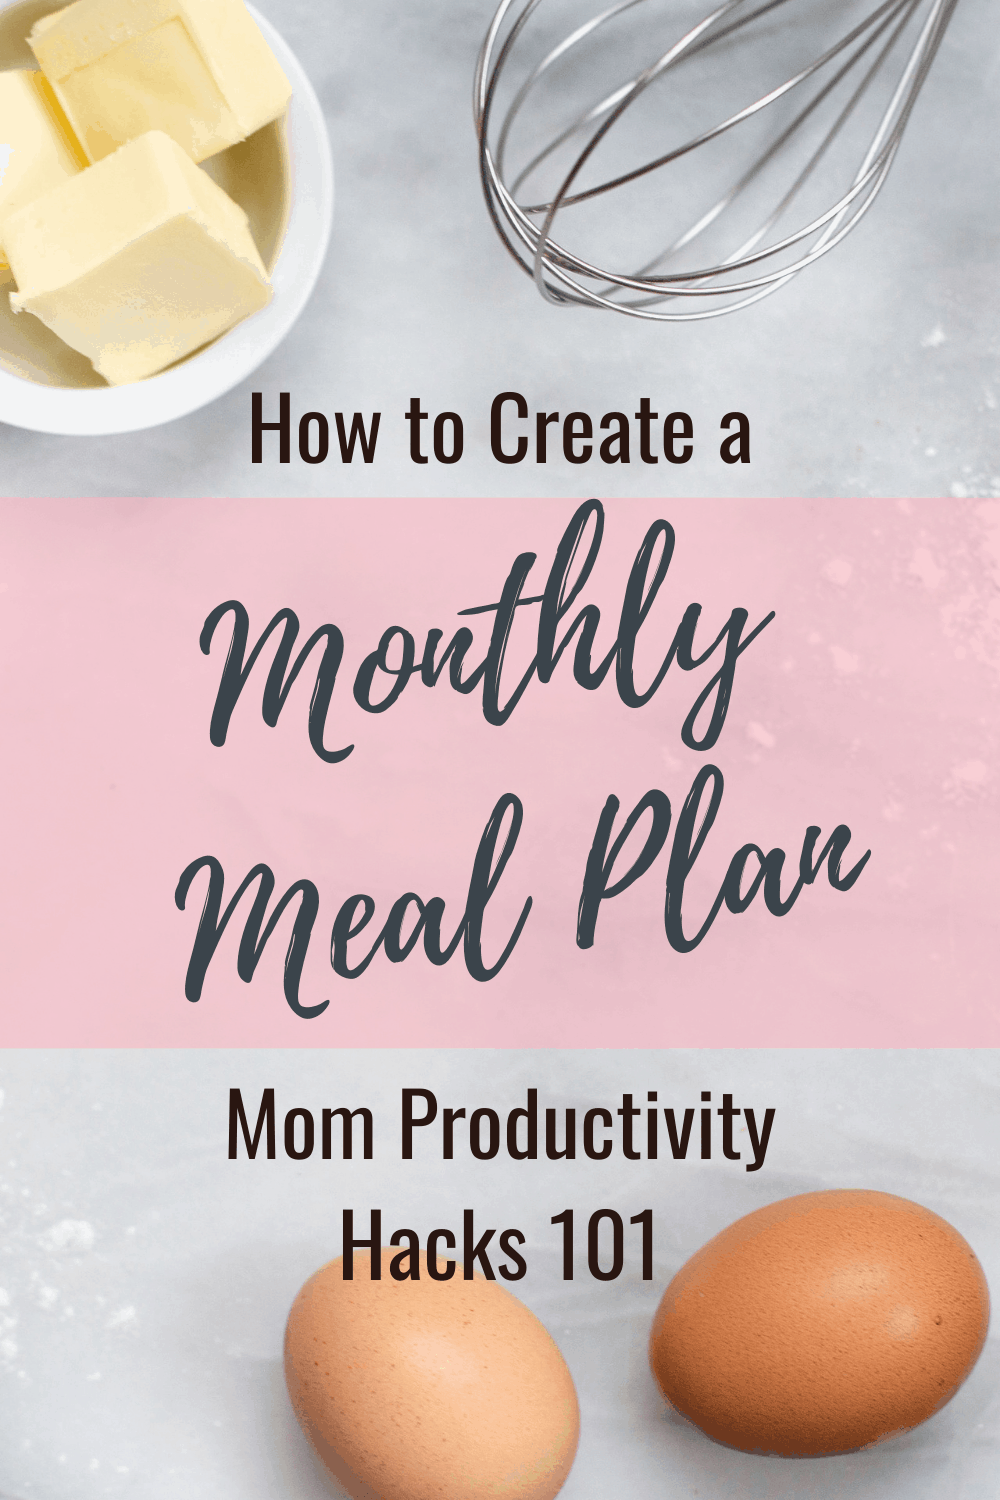 3 Easy Steps to Creating Your Amazing Monthly Meal Plan